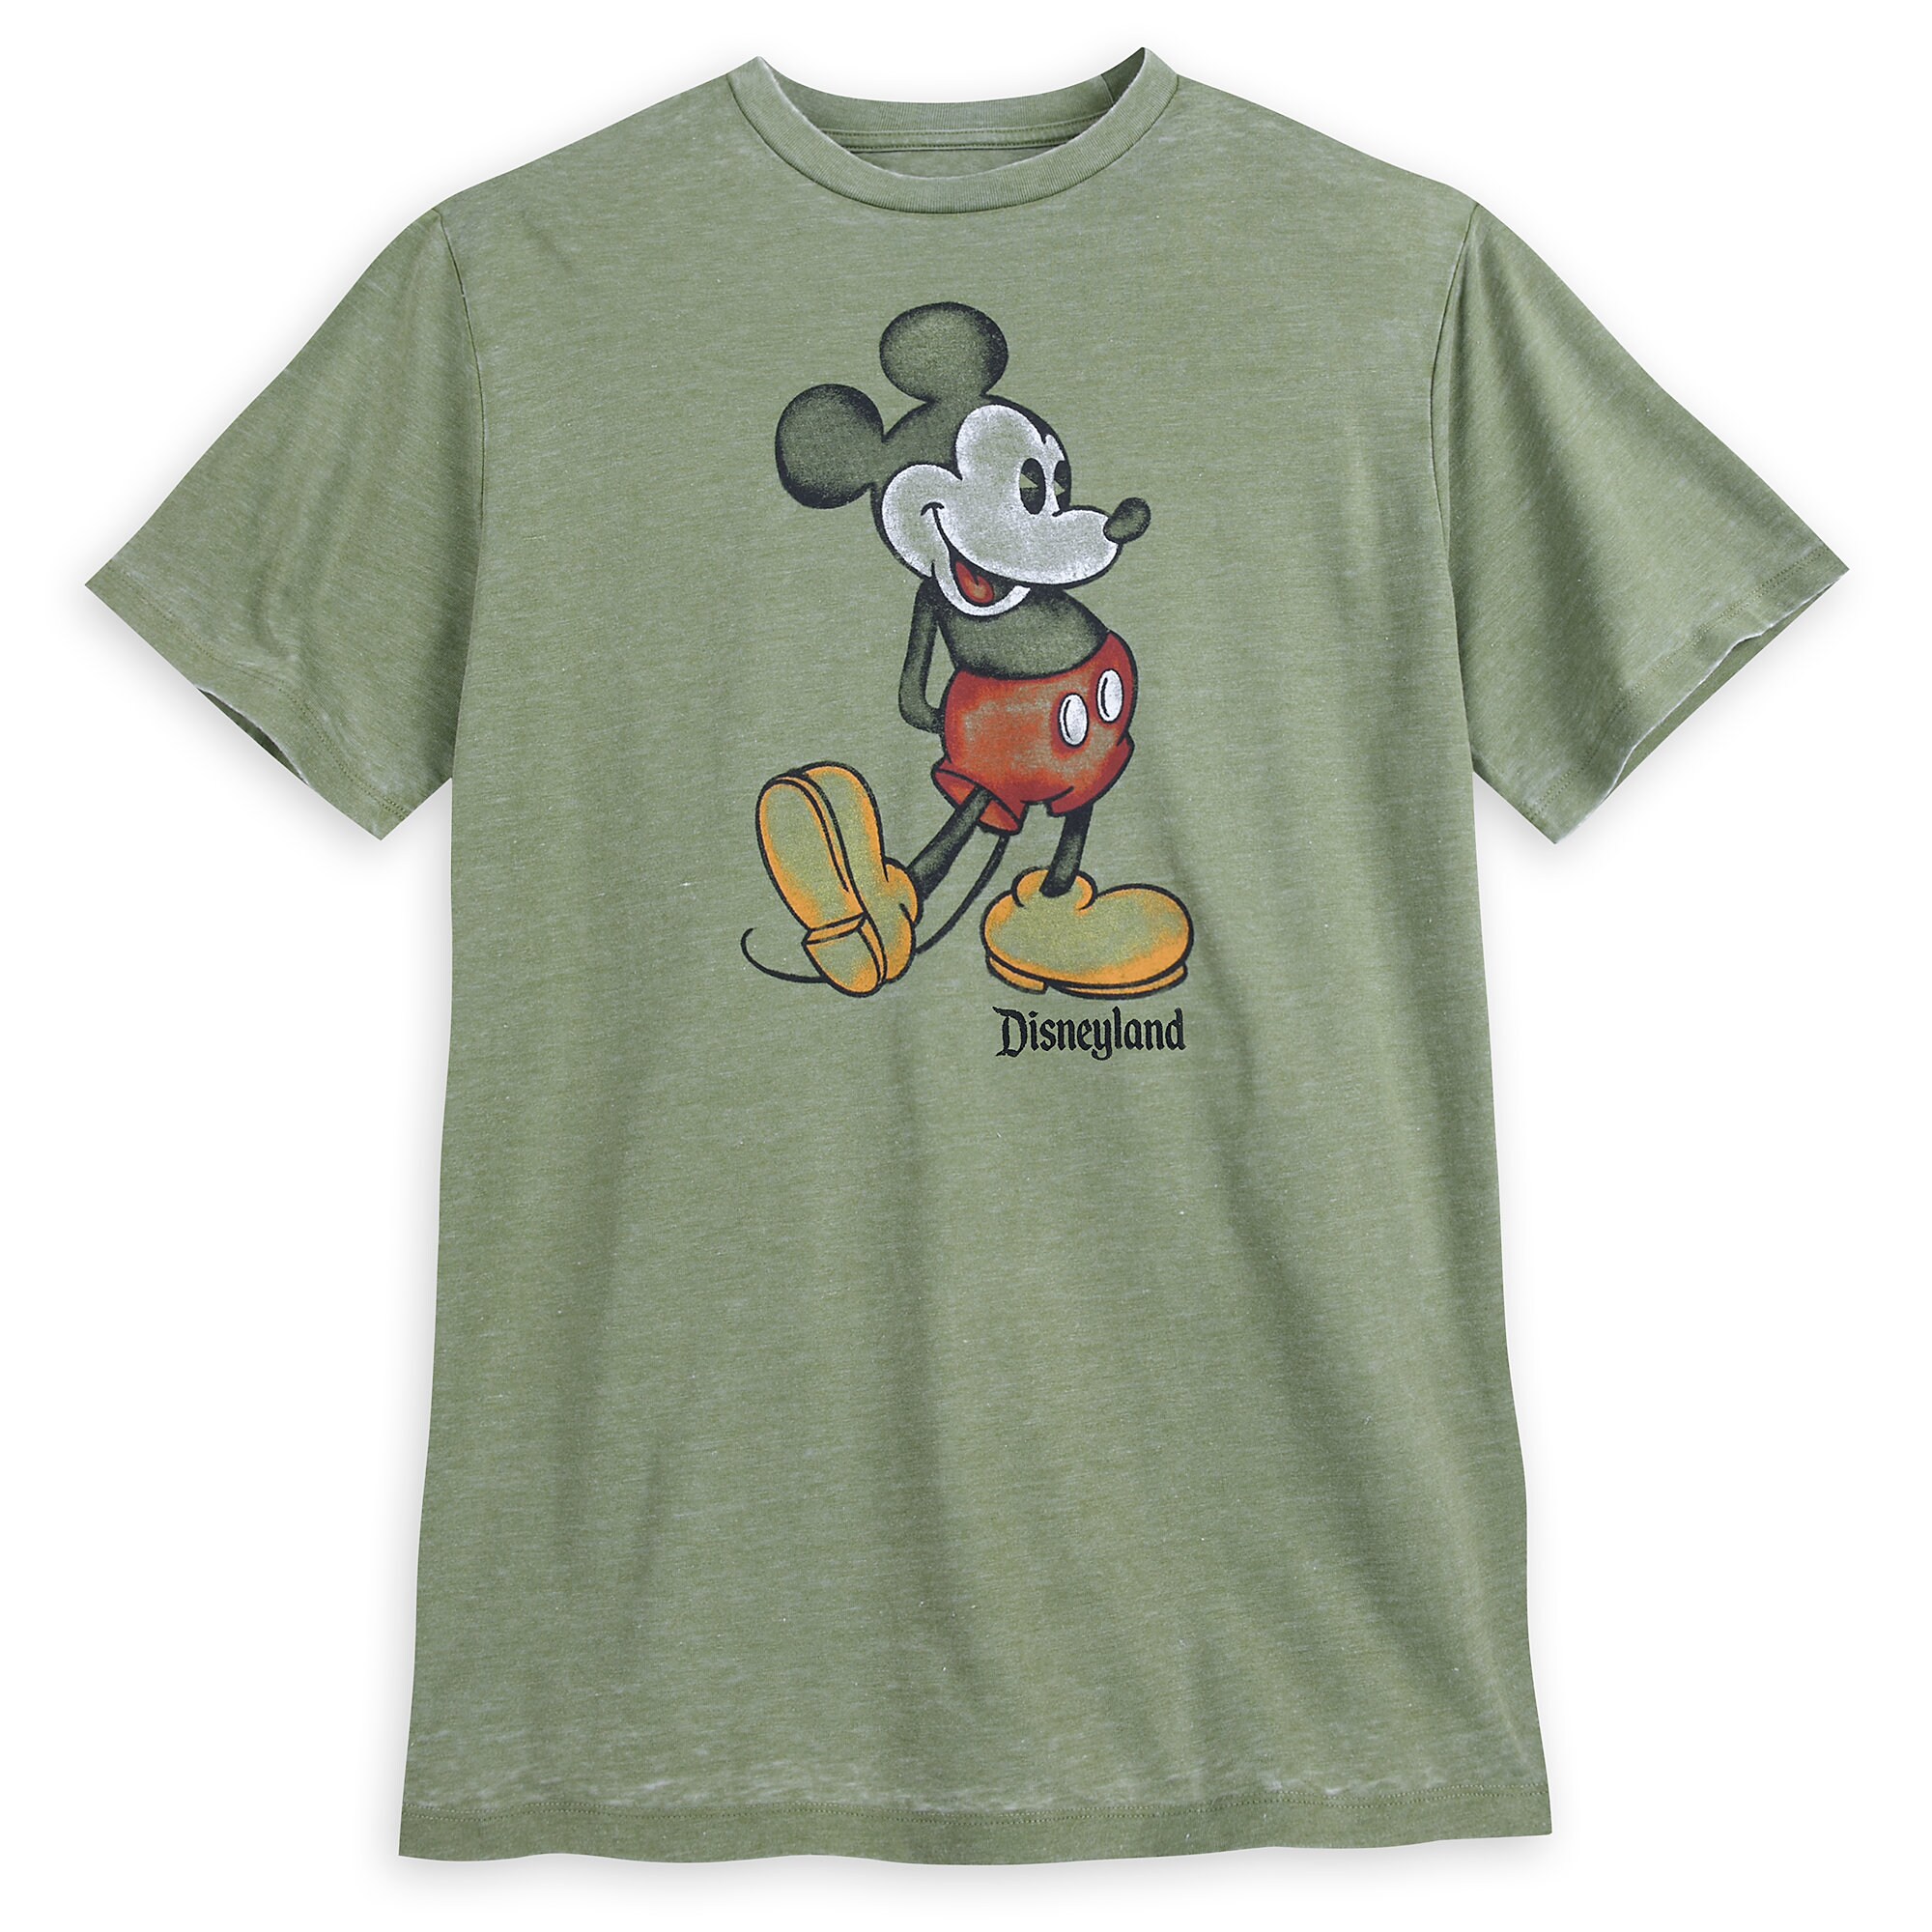 Mickey Mouse Classic T-Shirt for Men - Disneyland - Green